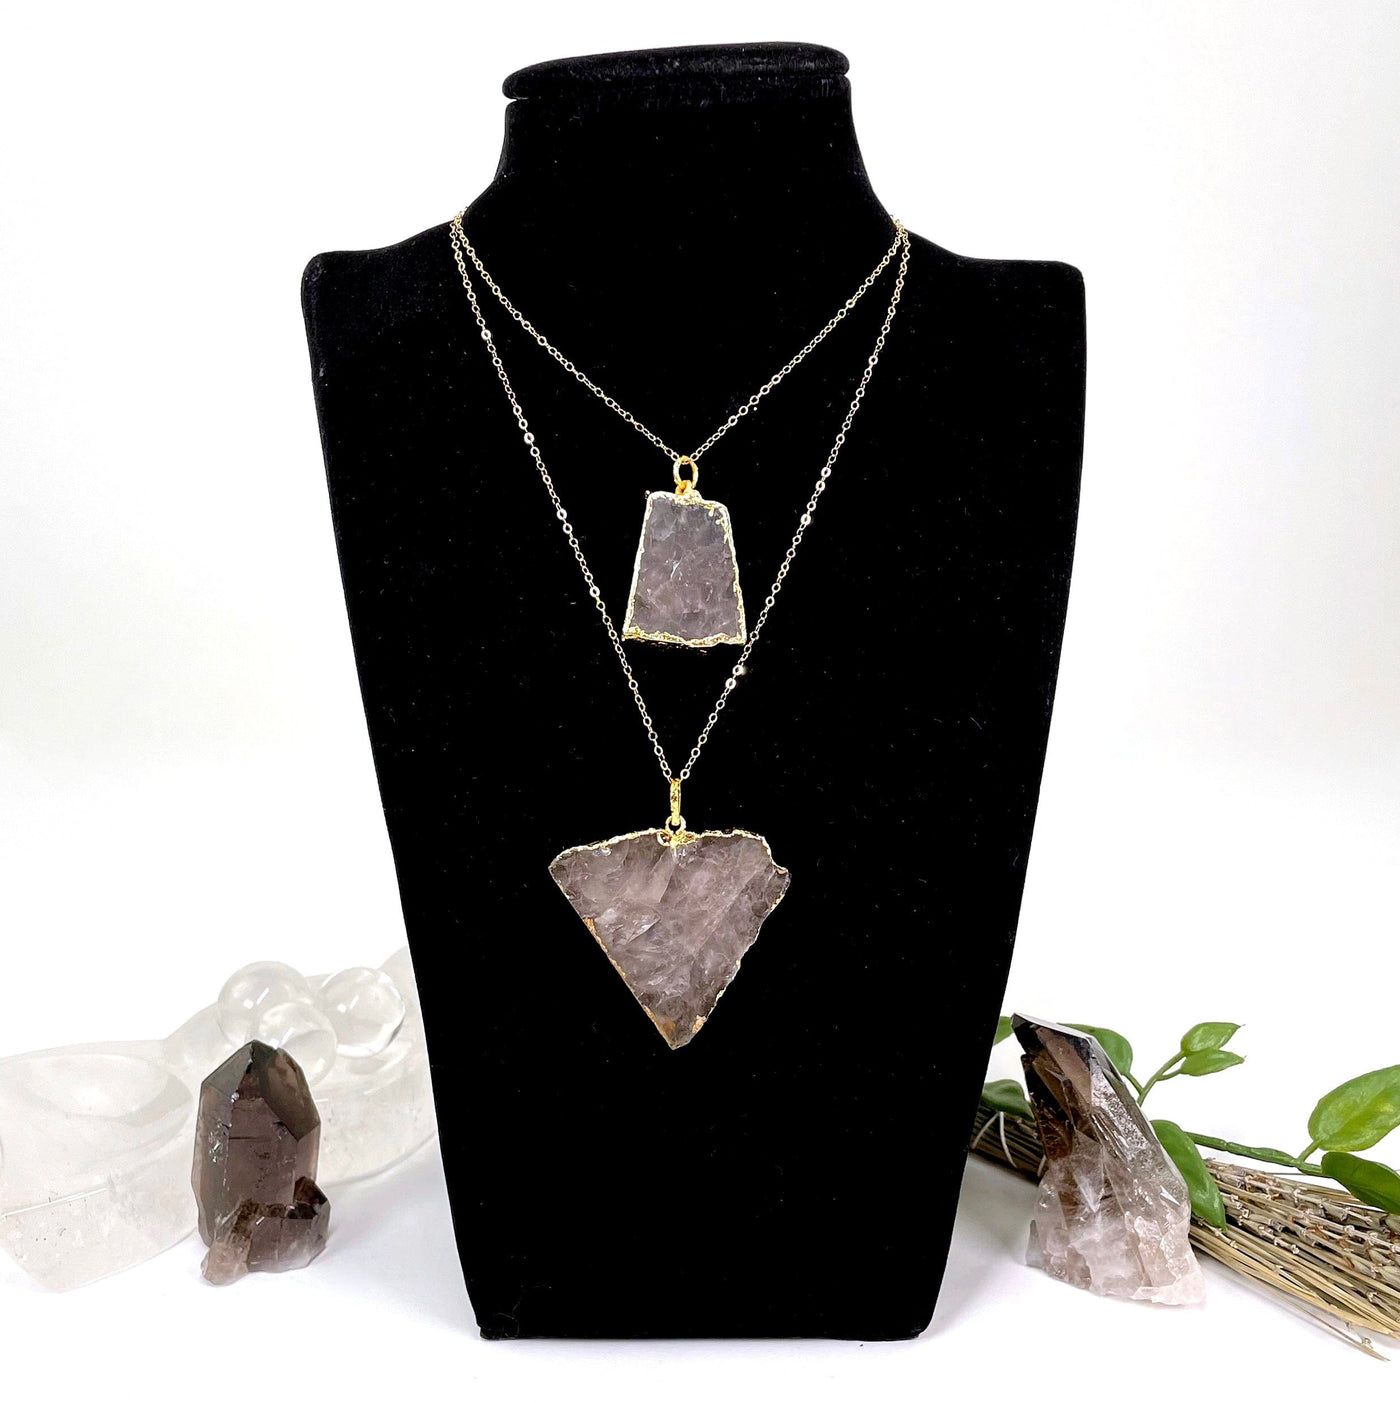 two smokey quartz slab pendants with chain hanging on bust display at different lengths